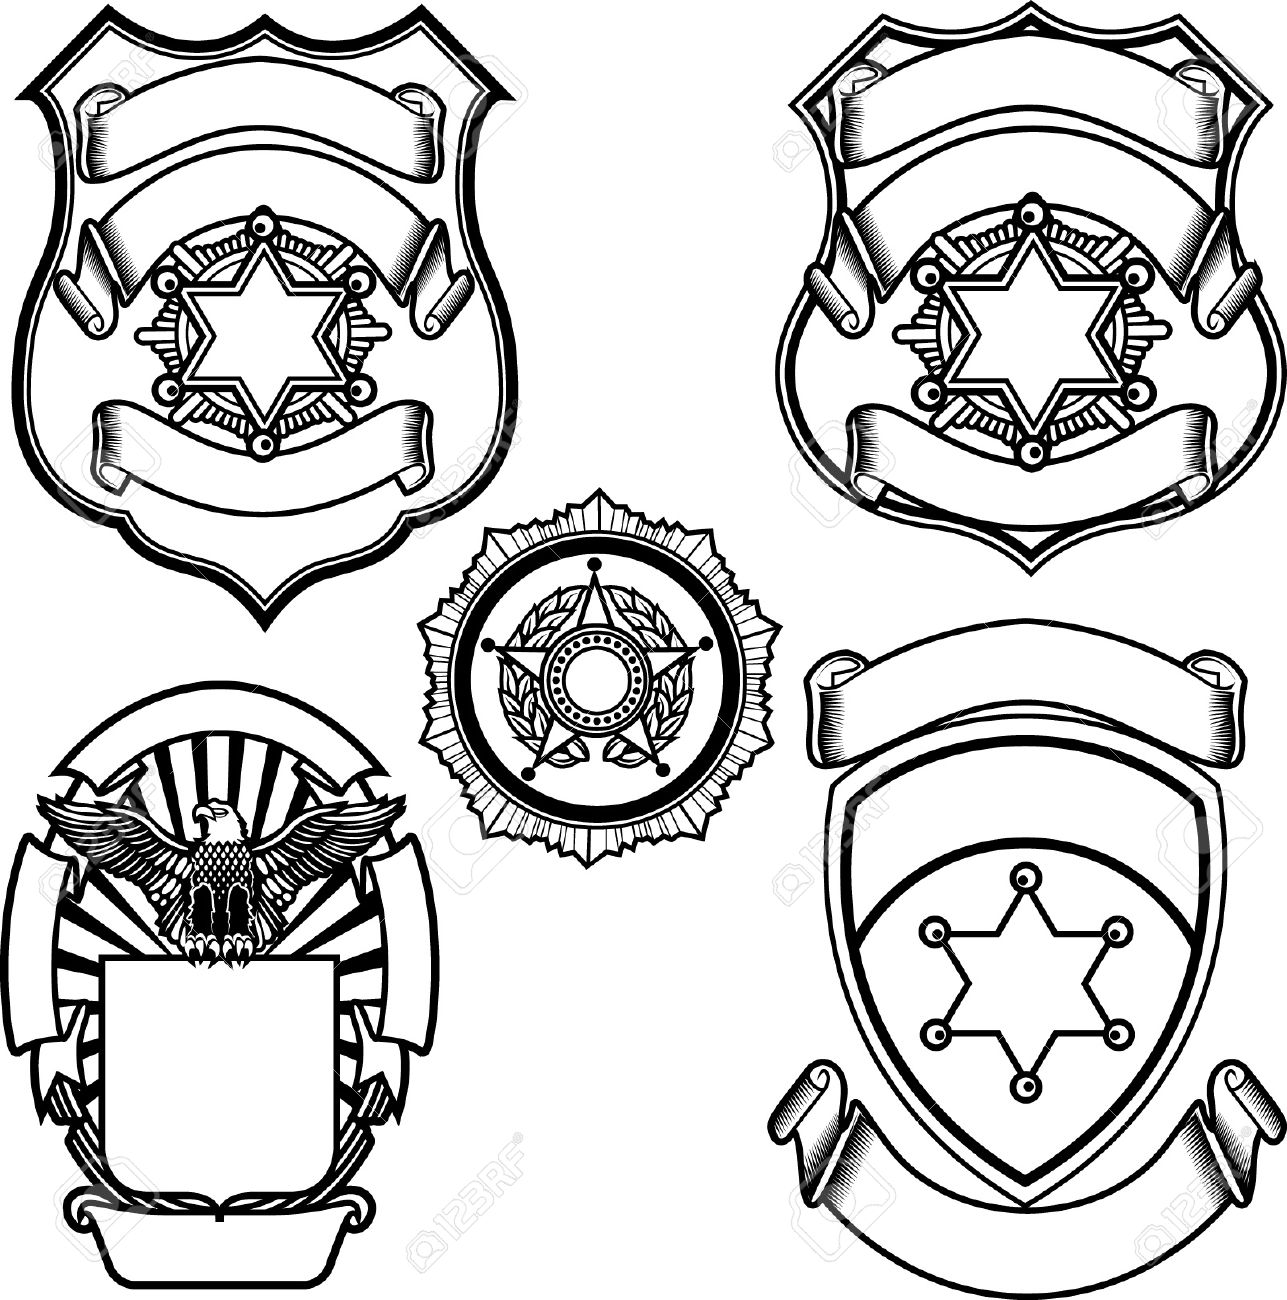 police-badge-template-free-download-on-clipartmag